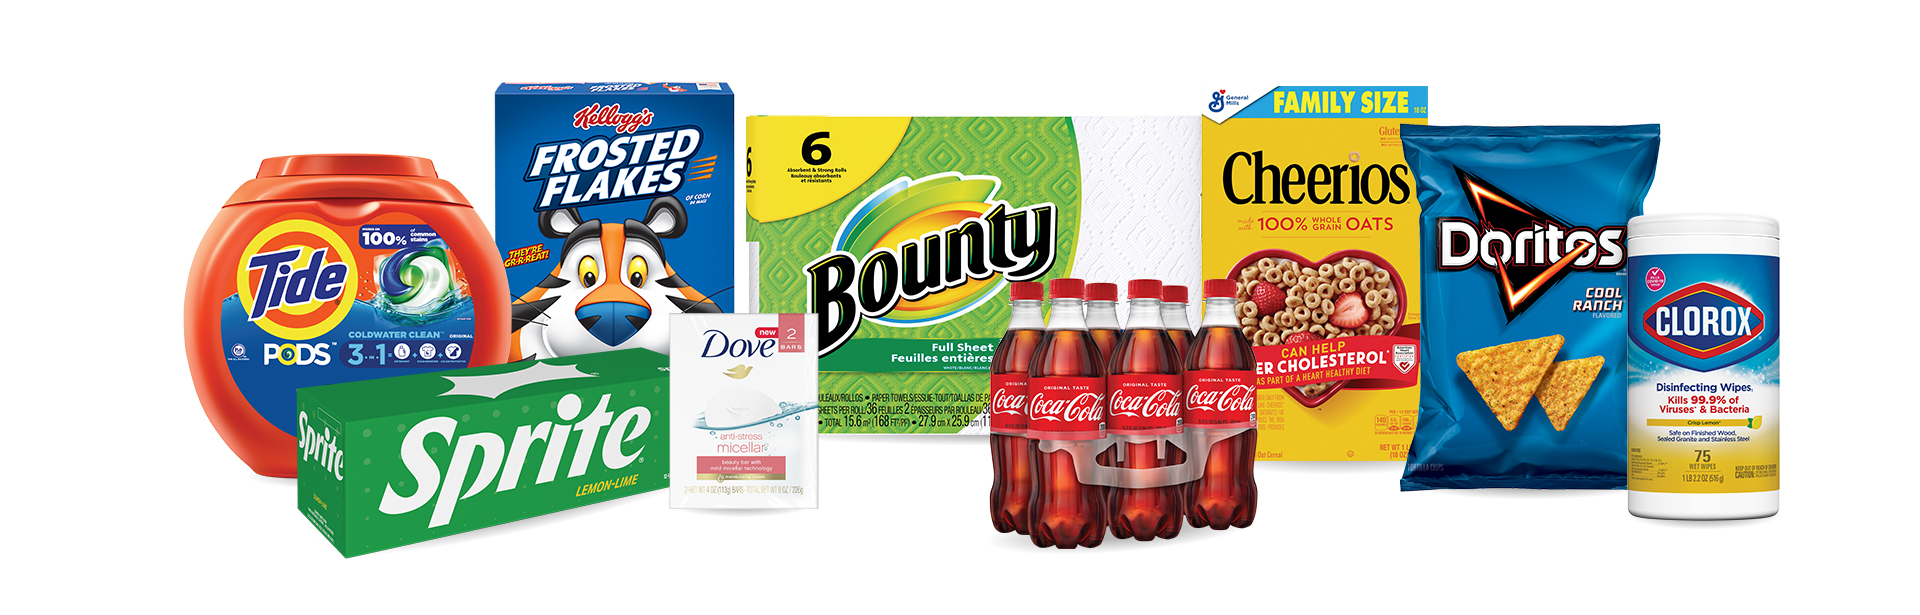 A photo of some of the world's most trusted brands carried by Dollar General.